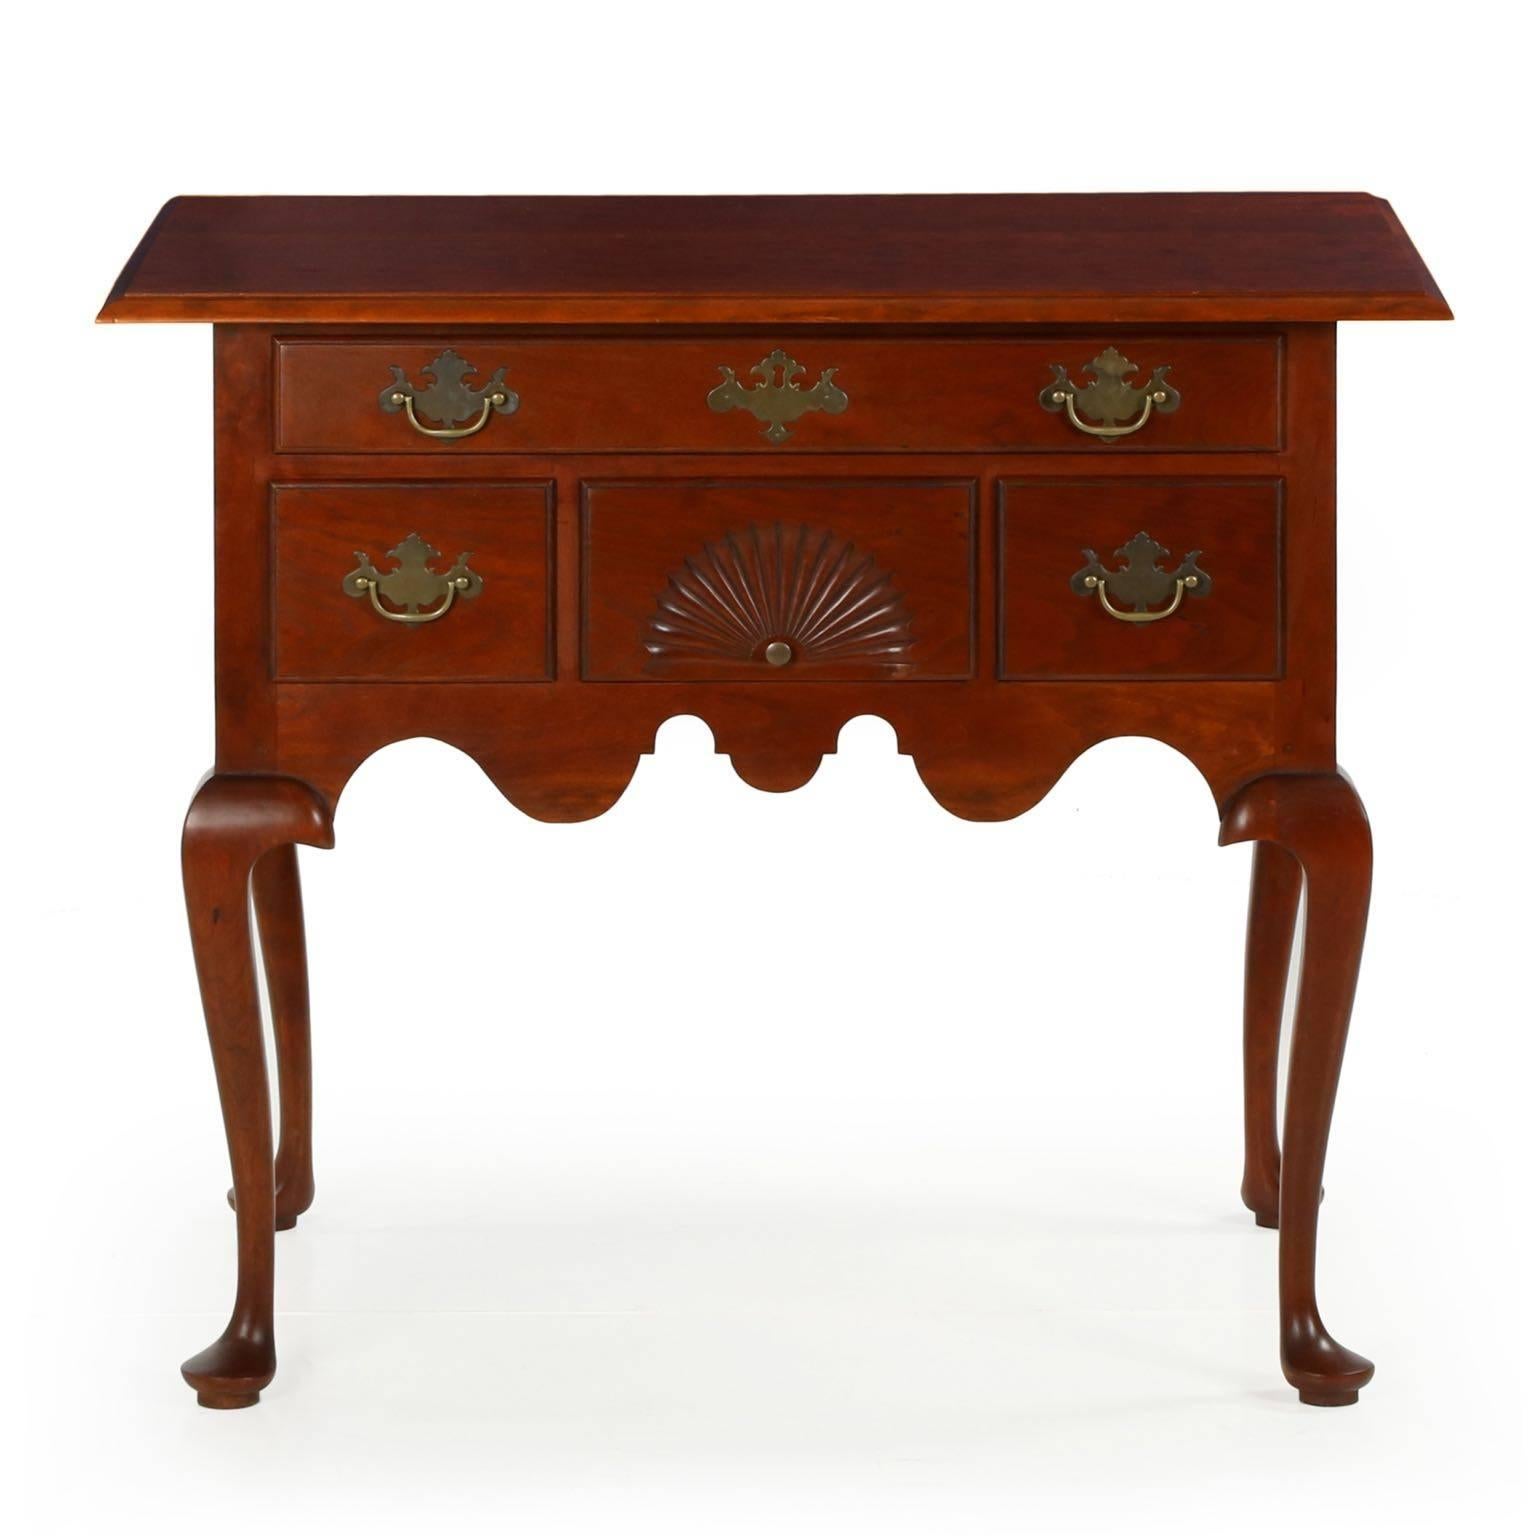 A very nice handcrafted reproduction of the original lowboys from Connecticut, circa 1760, this entirely bench made piece was crafted by the firm of Eldred Wheeler and retains original labels in the drawers. The piece is crafted of solid cherry, the